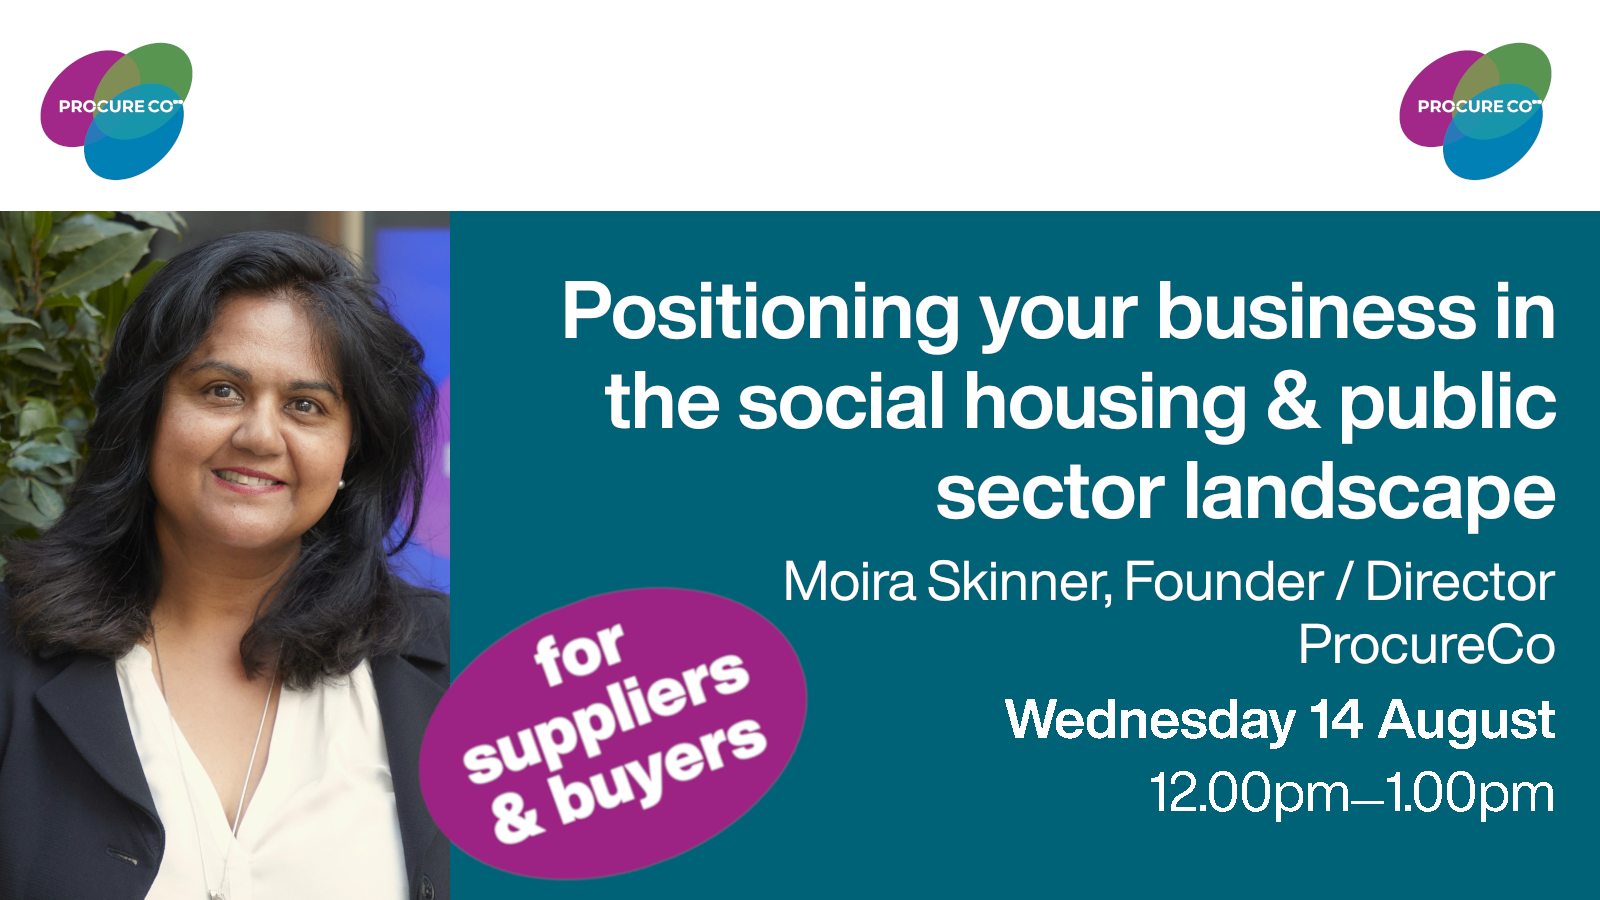 Moira Skinner, ProcureCo Founder / Director on 'Positioning your business in the social housing & public sector landscape'